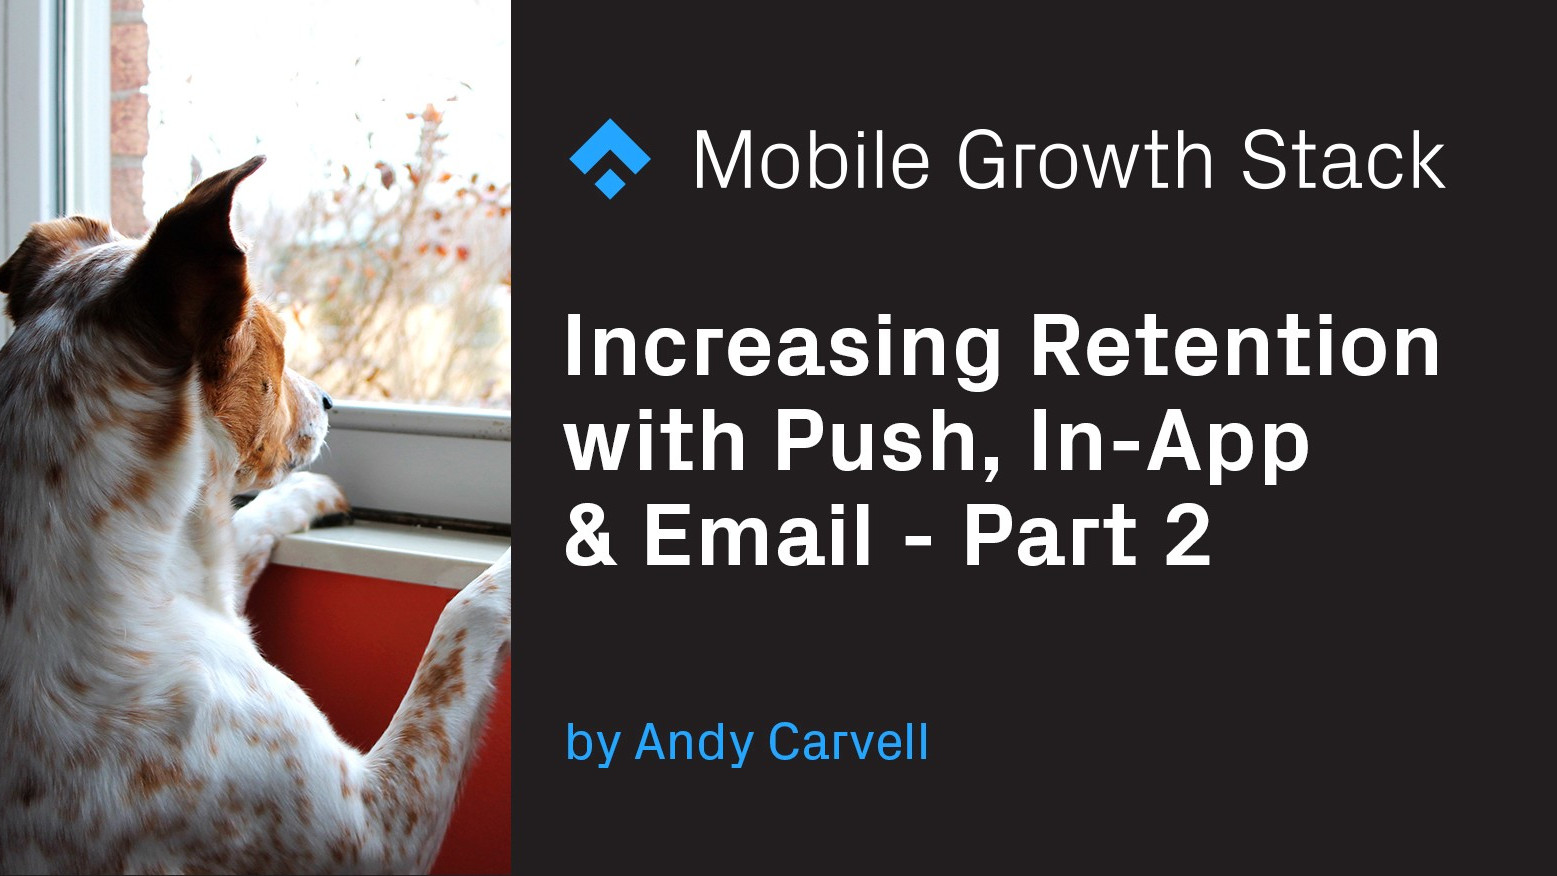 Increasing Retention with Push, In-App and Email Part 2: Developing a Mobile CRM Strategy for Retention